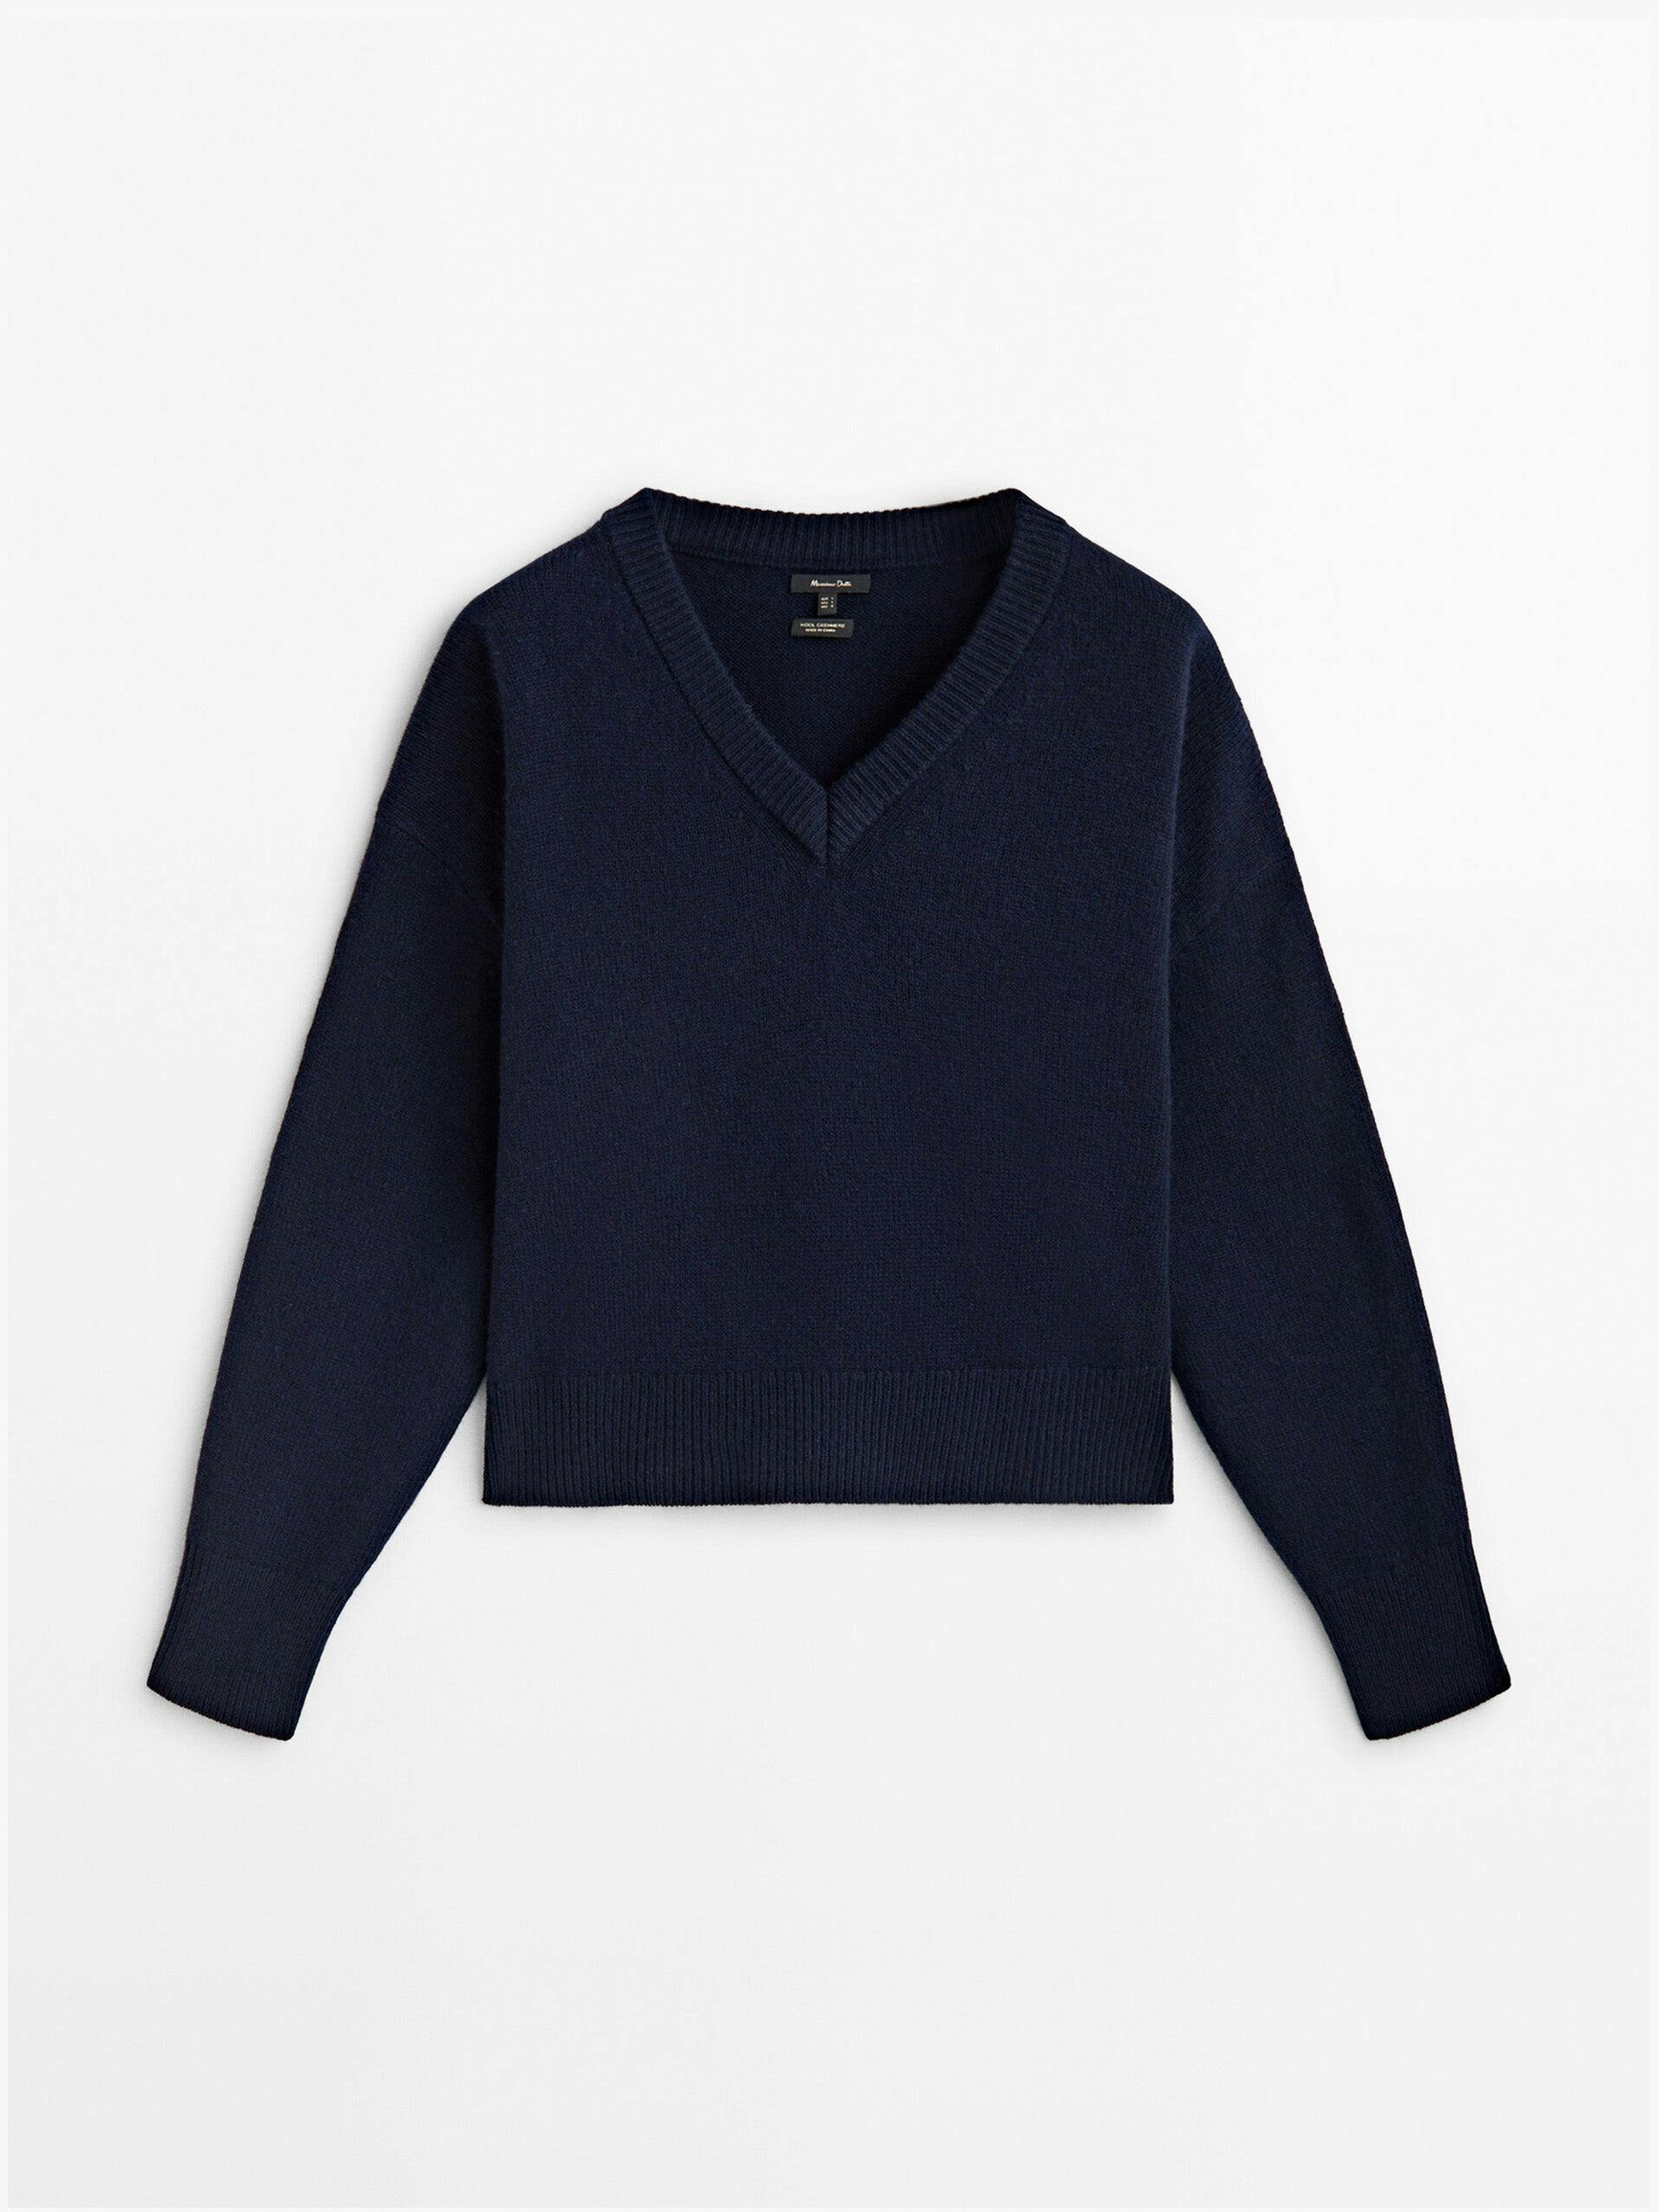 Wool and cashmere blend v-neck sweater